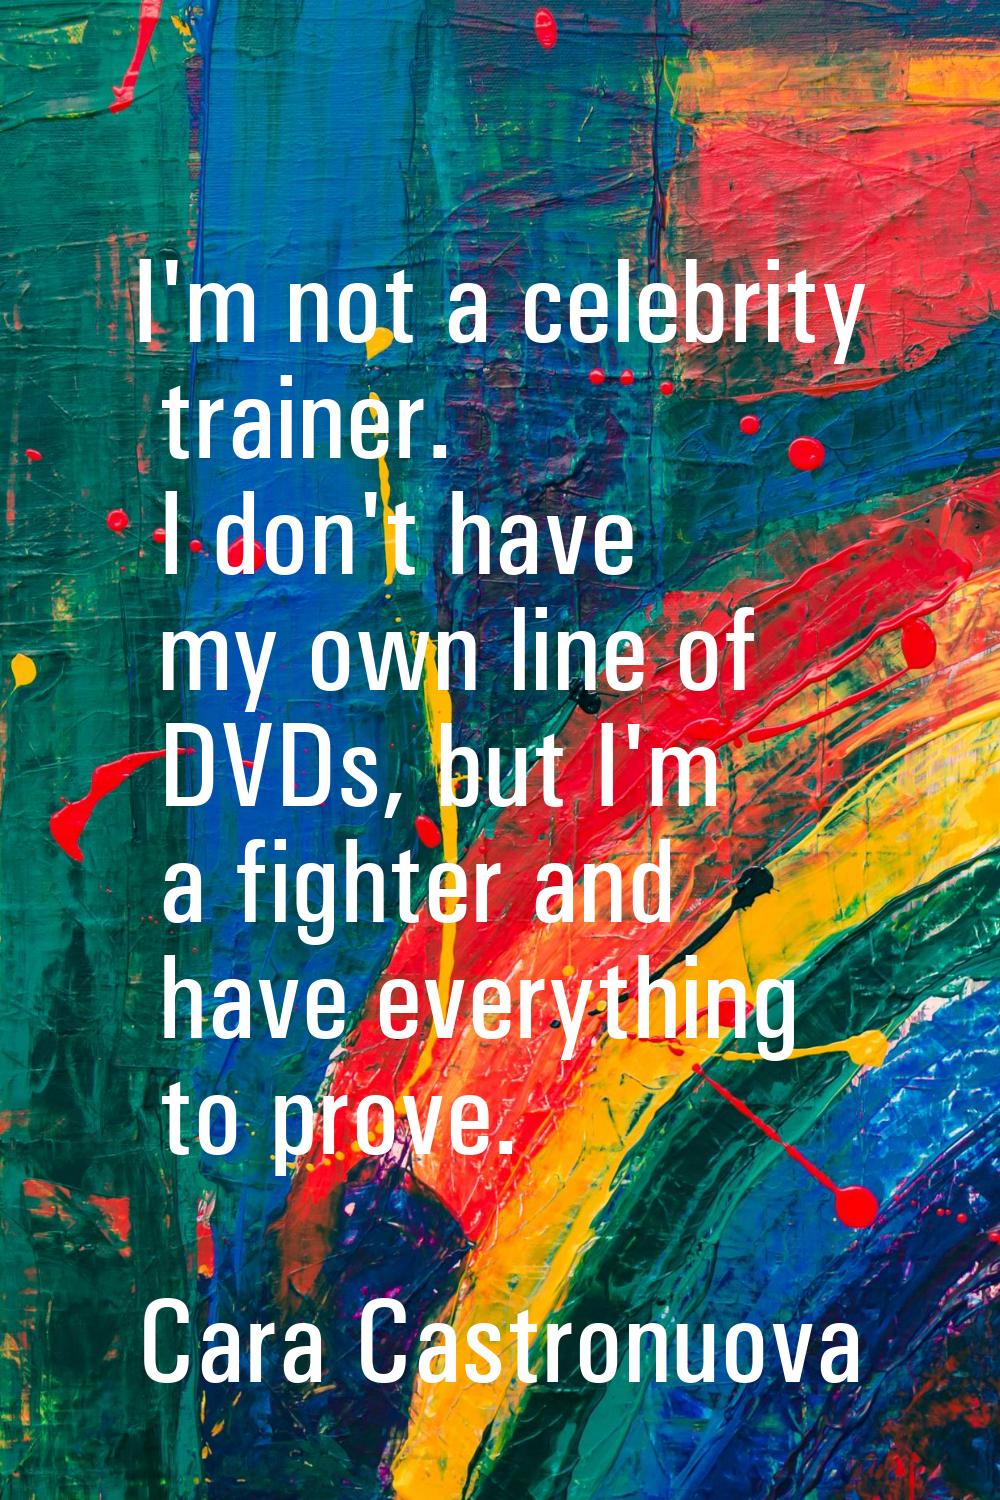 I'm not a celebrity trainer. I don't have my own line of DVDs, but I'm a fighter and have everythin